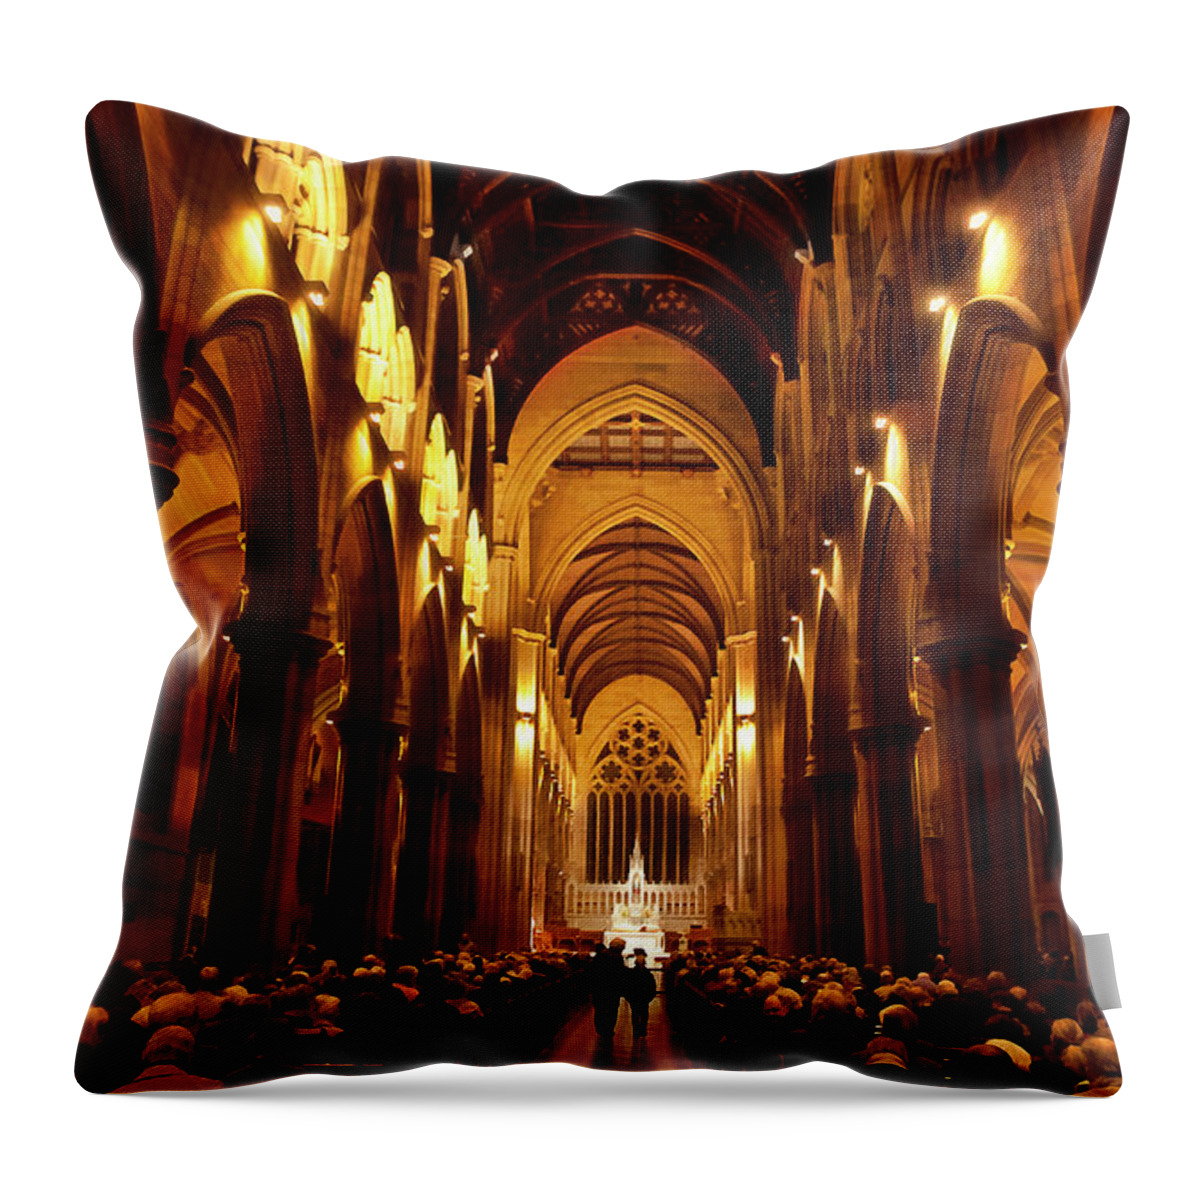 Interior Throw Pillow featuring the photograph Stunning Interior Of St Mary's Cathedral by Miroslava Jurcik